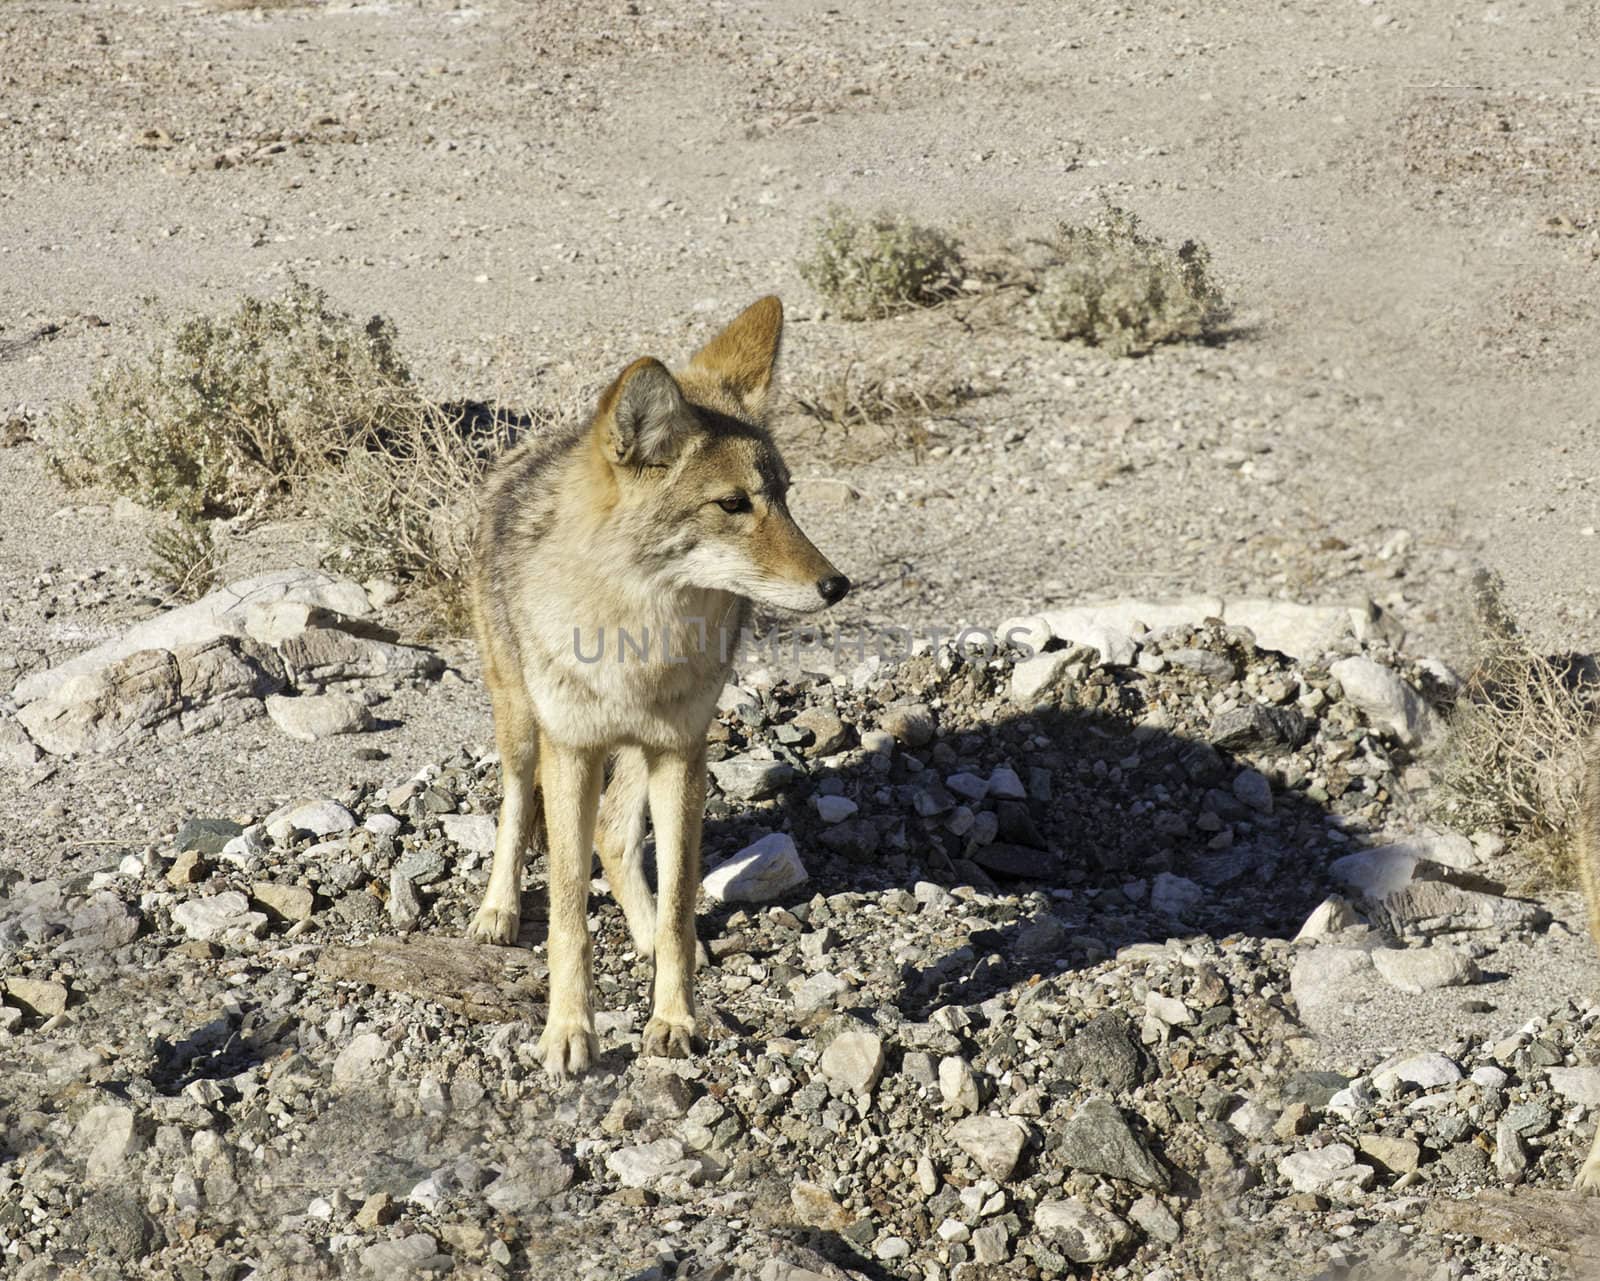 coyote in Death Valley by jeffbanke